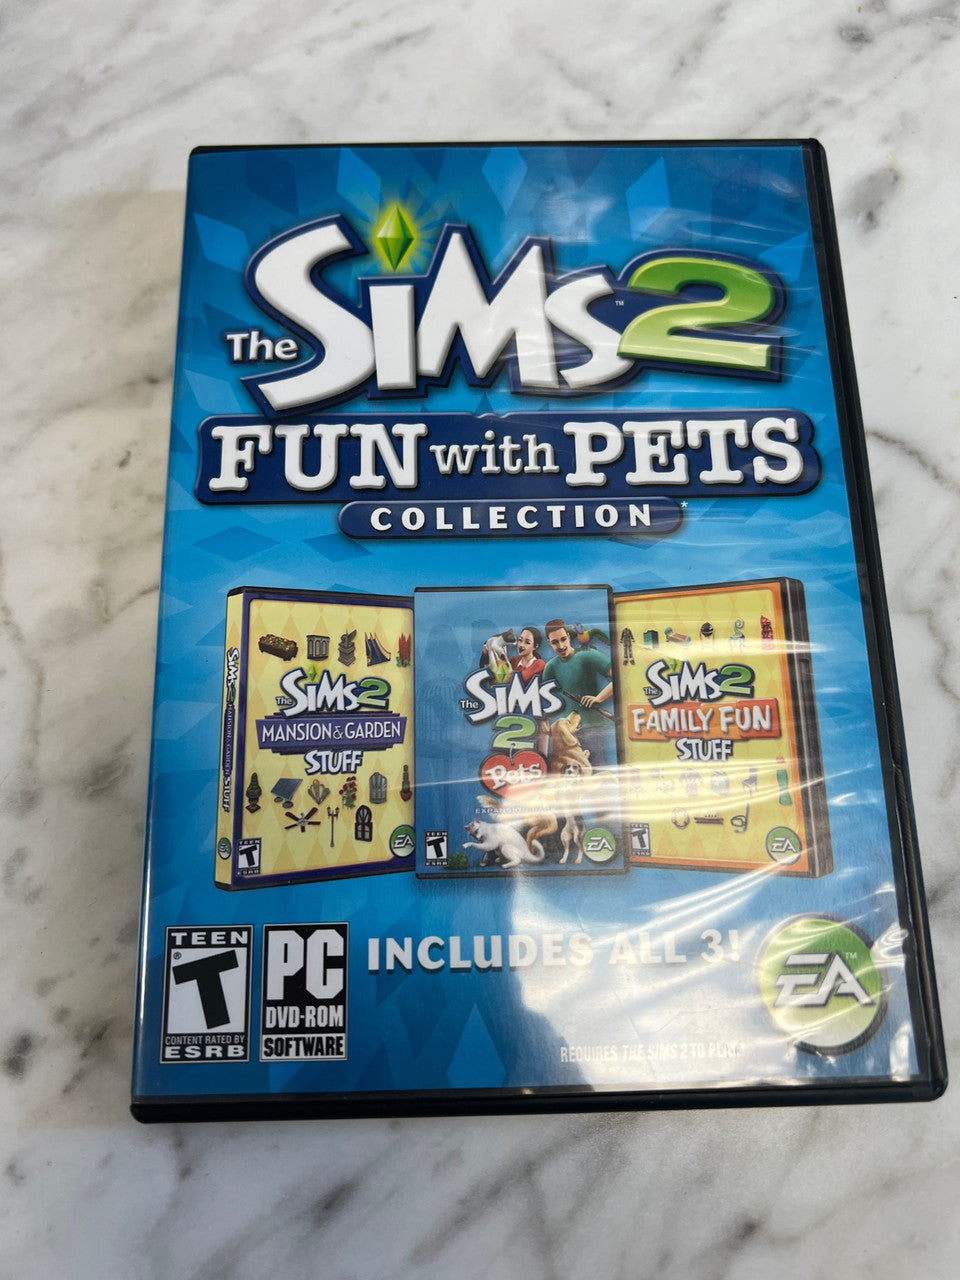 Sims 2: Fun With Pets Collection (PC, 2010) **COMPLETE COPY WITH CD KEY**